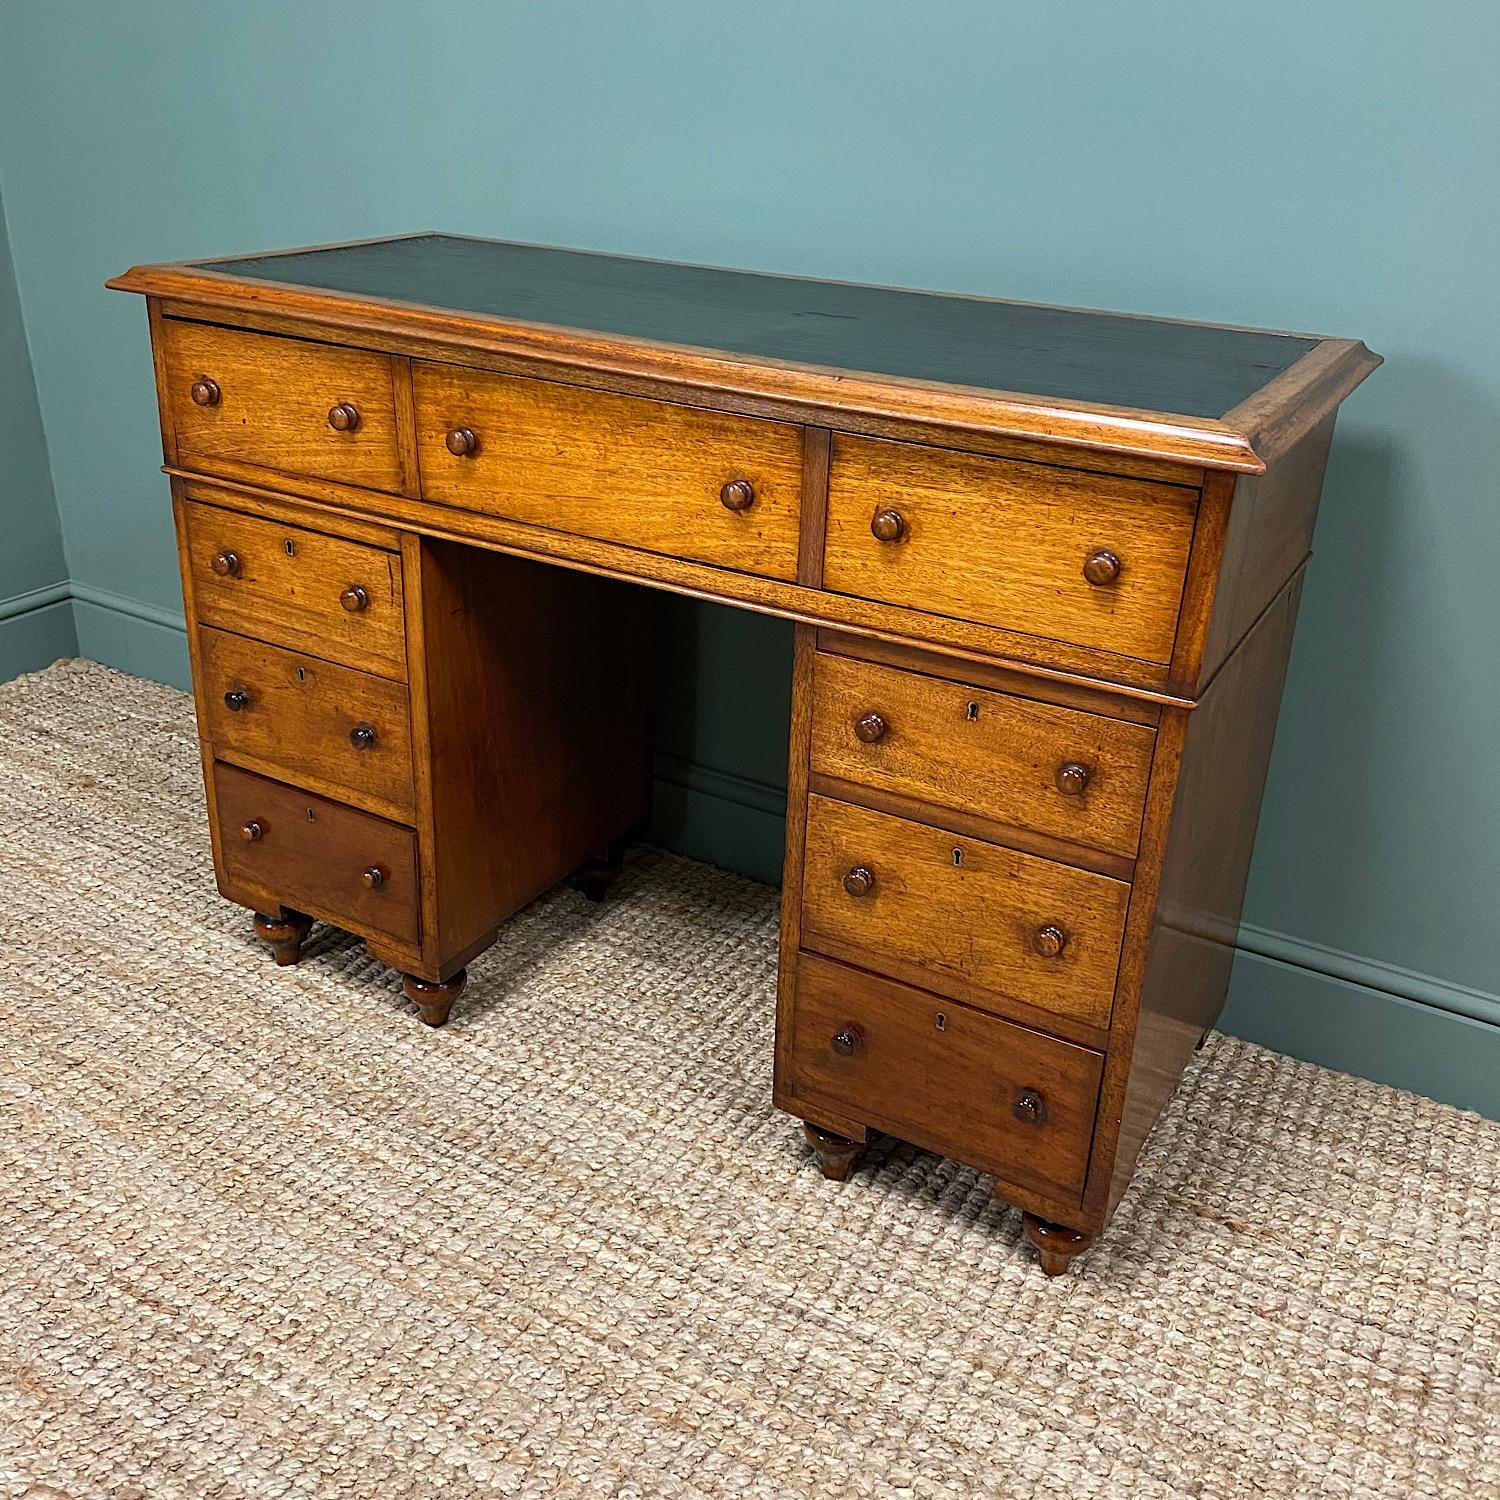 Country house Victorian antique campaign desk

This 19th century Country House Victorian Mahogany antique campaign desk dates from ca. 1860 and has aged to a wonderful warm shade. It has a moulded top with faux leather writing insert above a